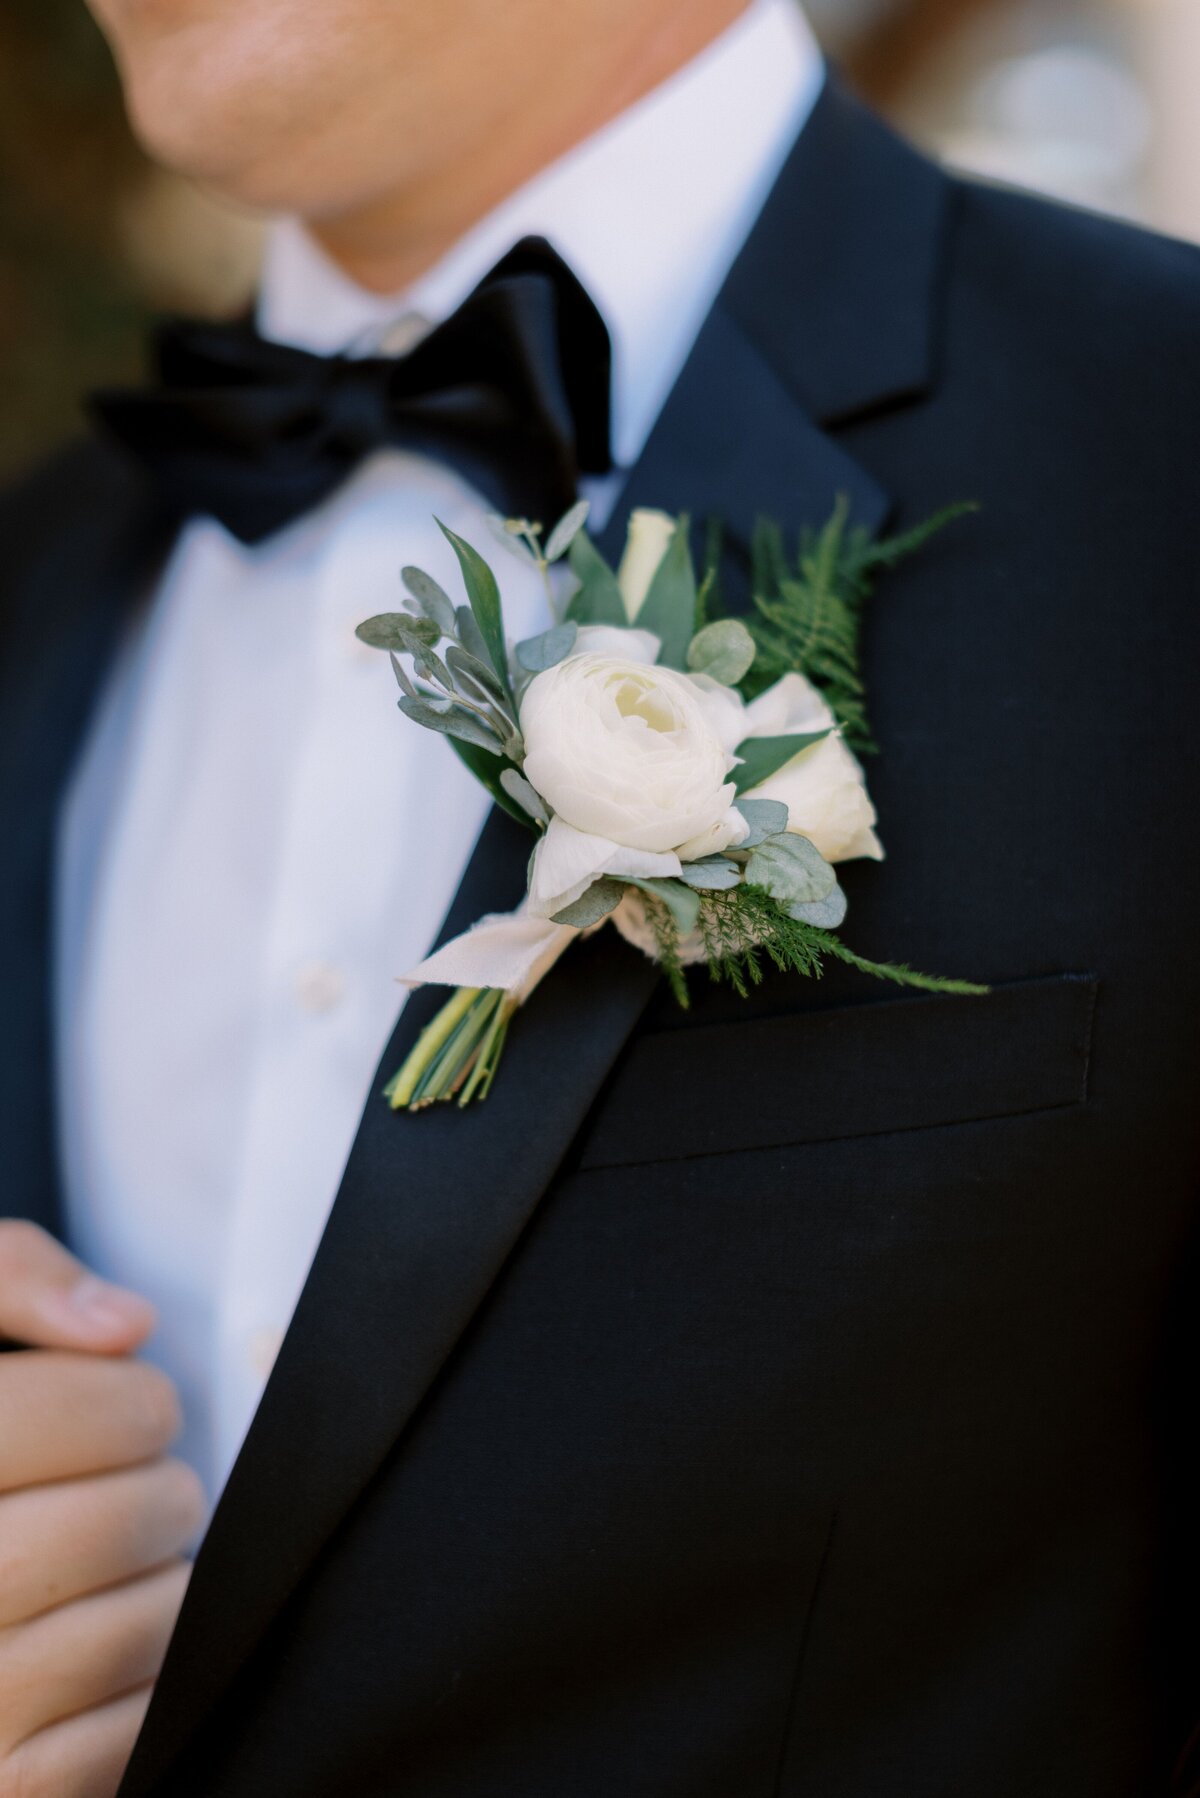 A boutonniere of a white rose and renuncula for the groom.